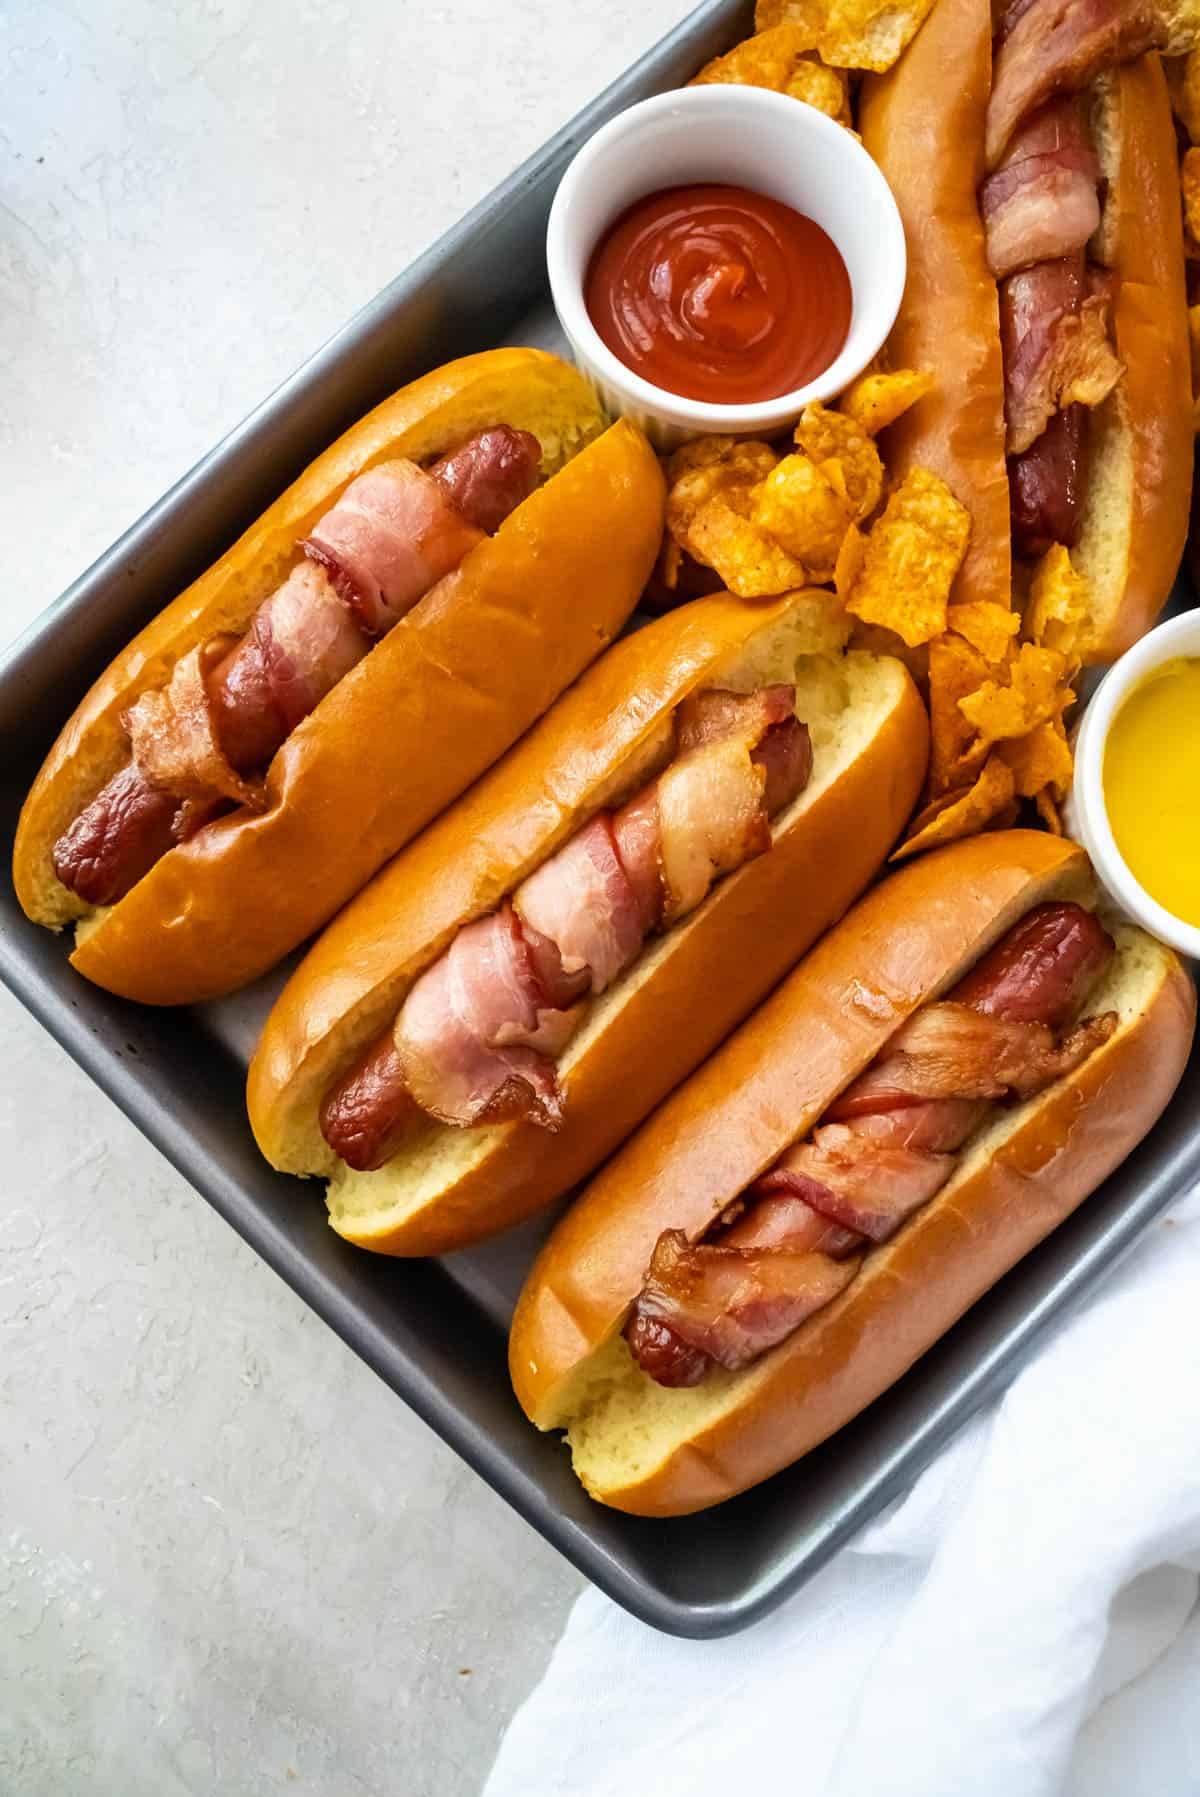 An overhead image of three bacon wrapped hot dogs in buns.